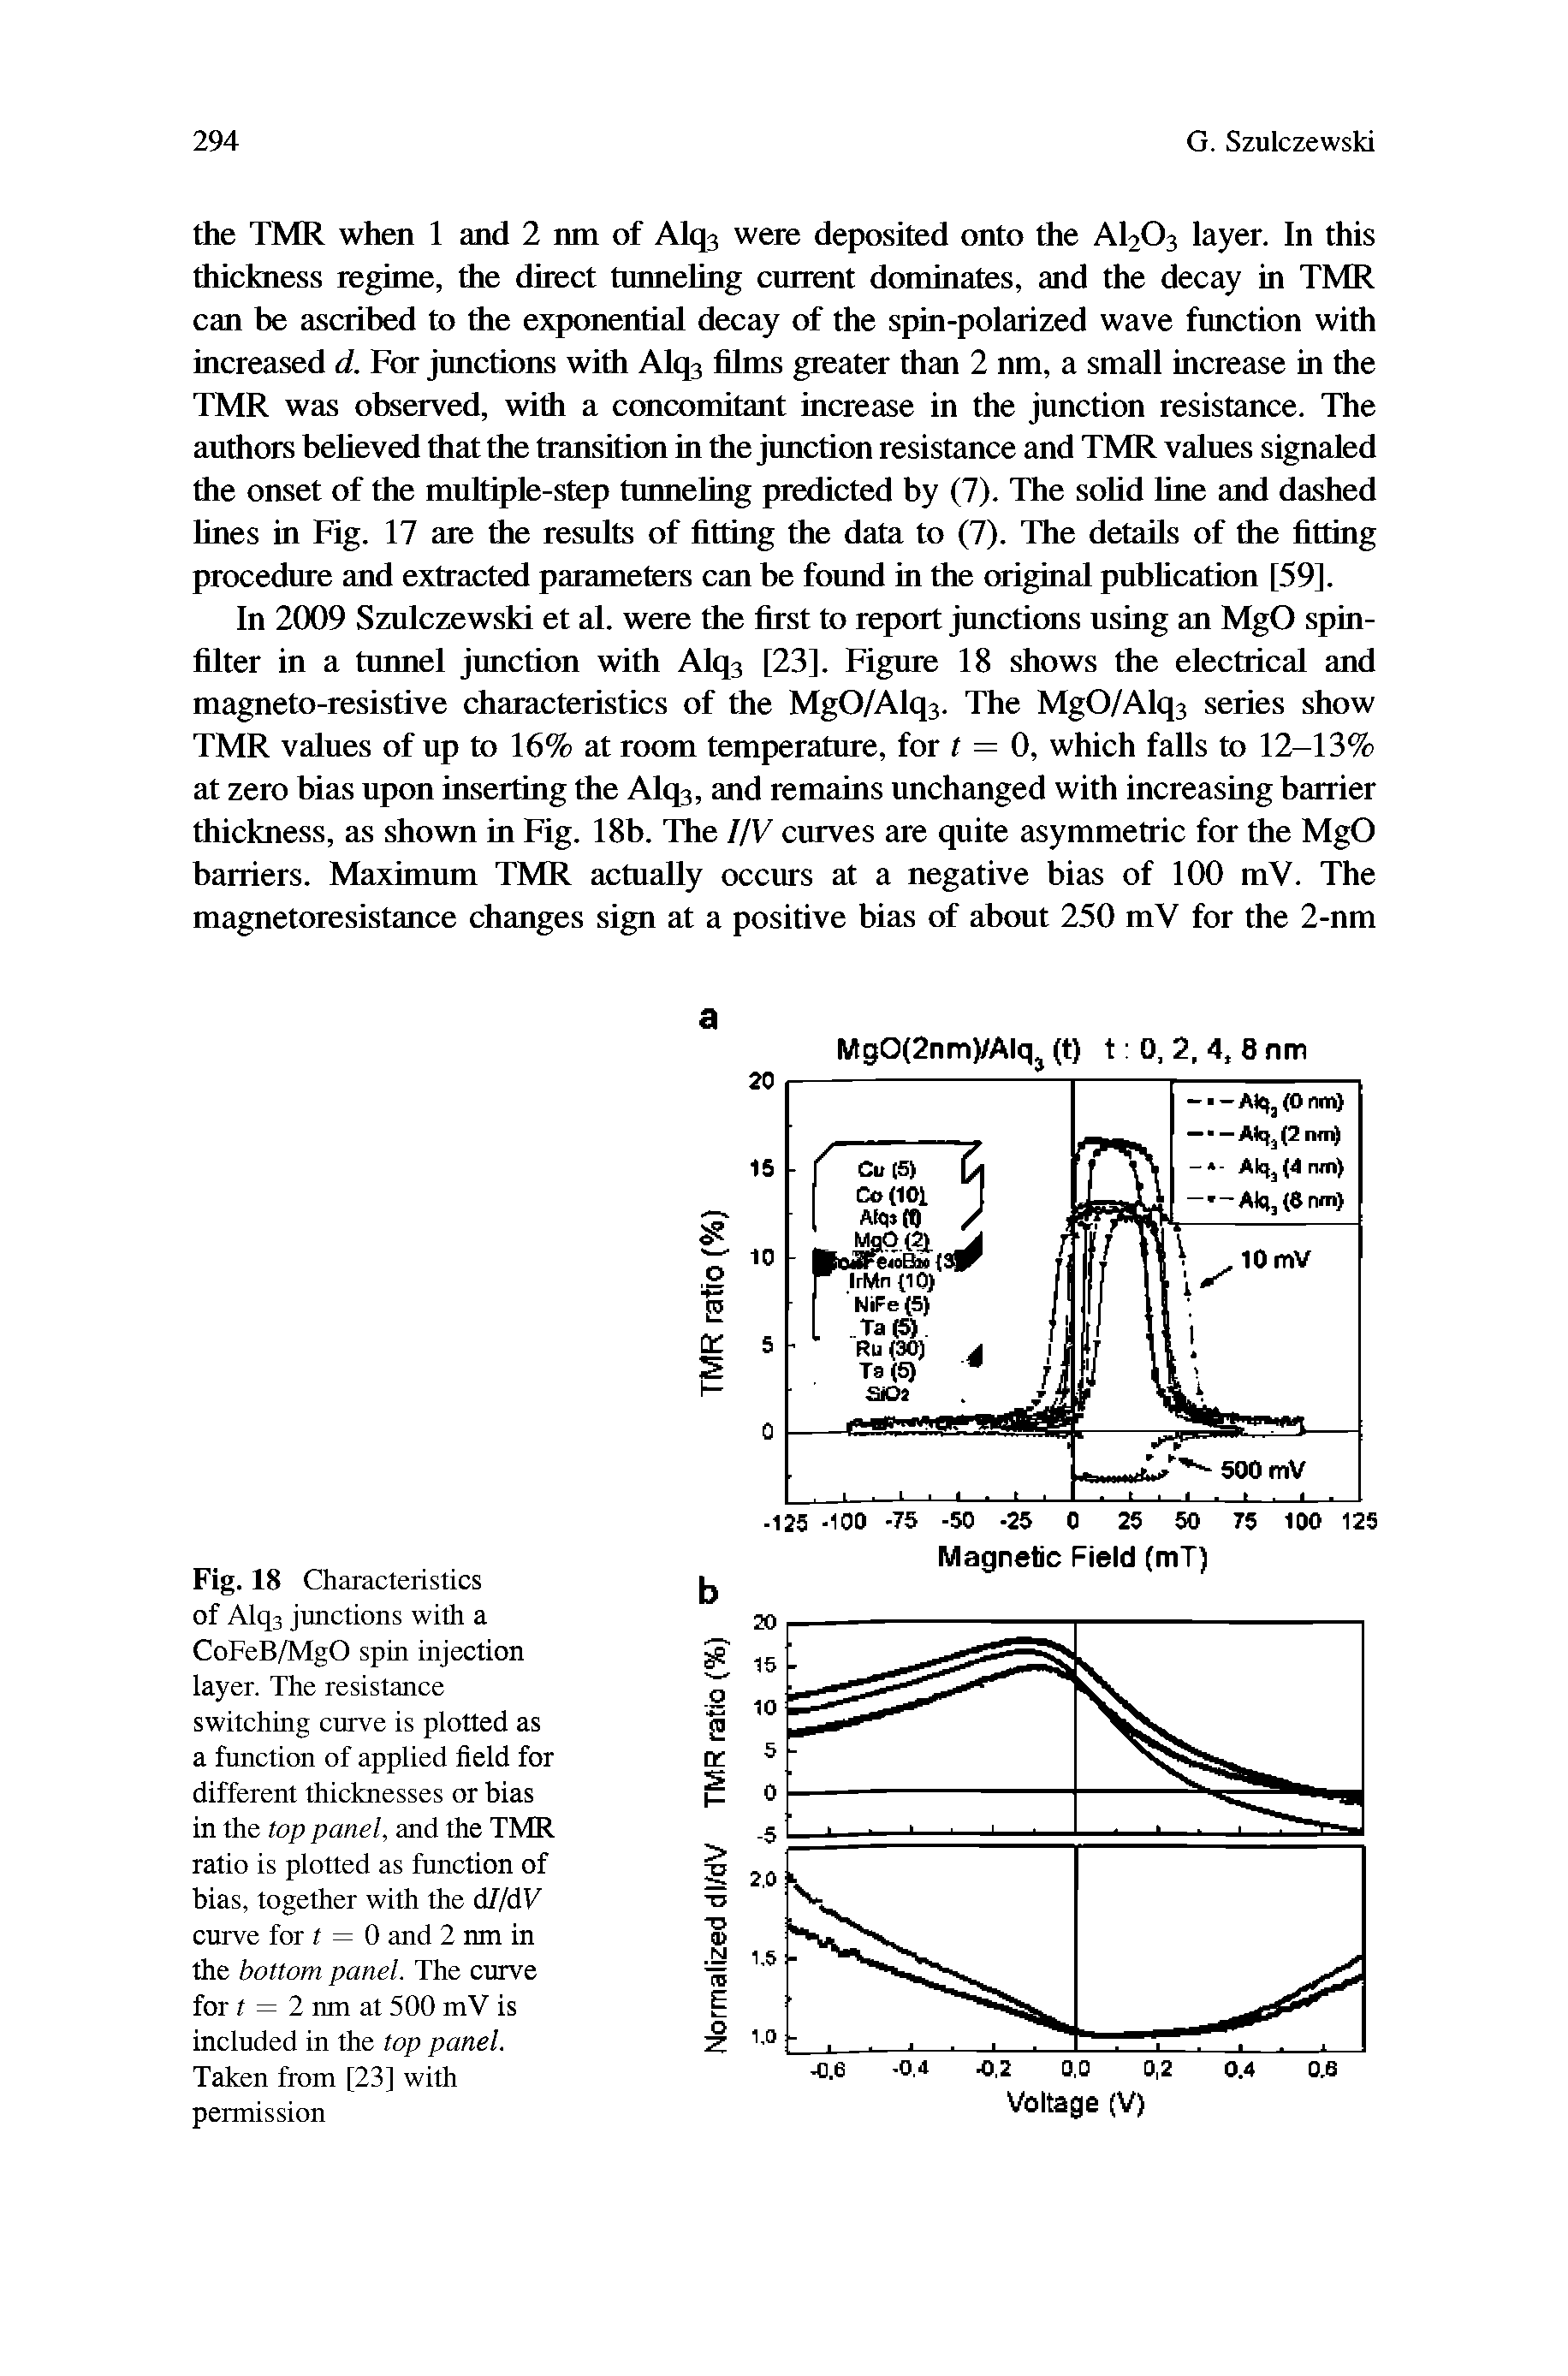 Fig. 18 Characteristics of Alq3 junctions with a CoFeB/MgO spin injection layer. The resistance switching curve is plotted as a function of applied field for different thicknesses or bias in the top panel, and the TMR ratio is plotted as function of bias, together with the d//dF curve for t = 0 and 2 nm in the bottom panel. The curve for t = 2 nm at 500 mV is included in the top panel. Taken from [23] with permission...